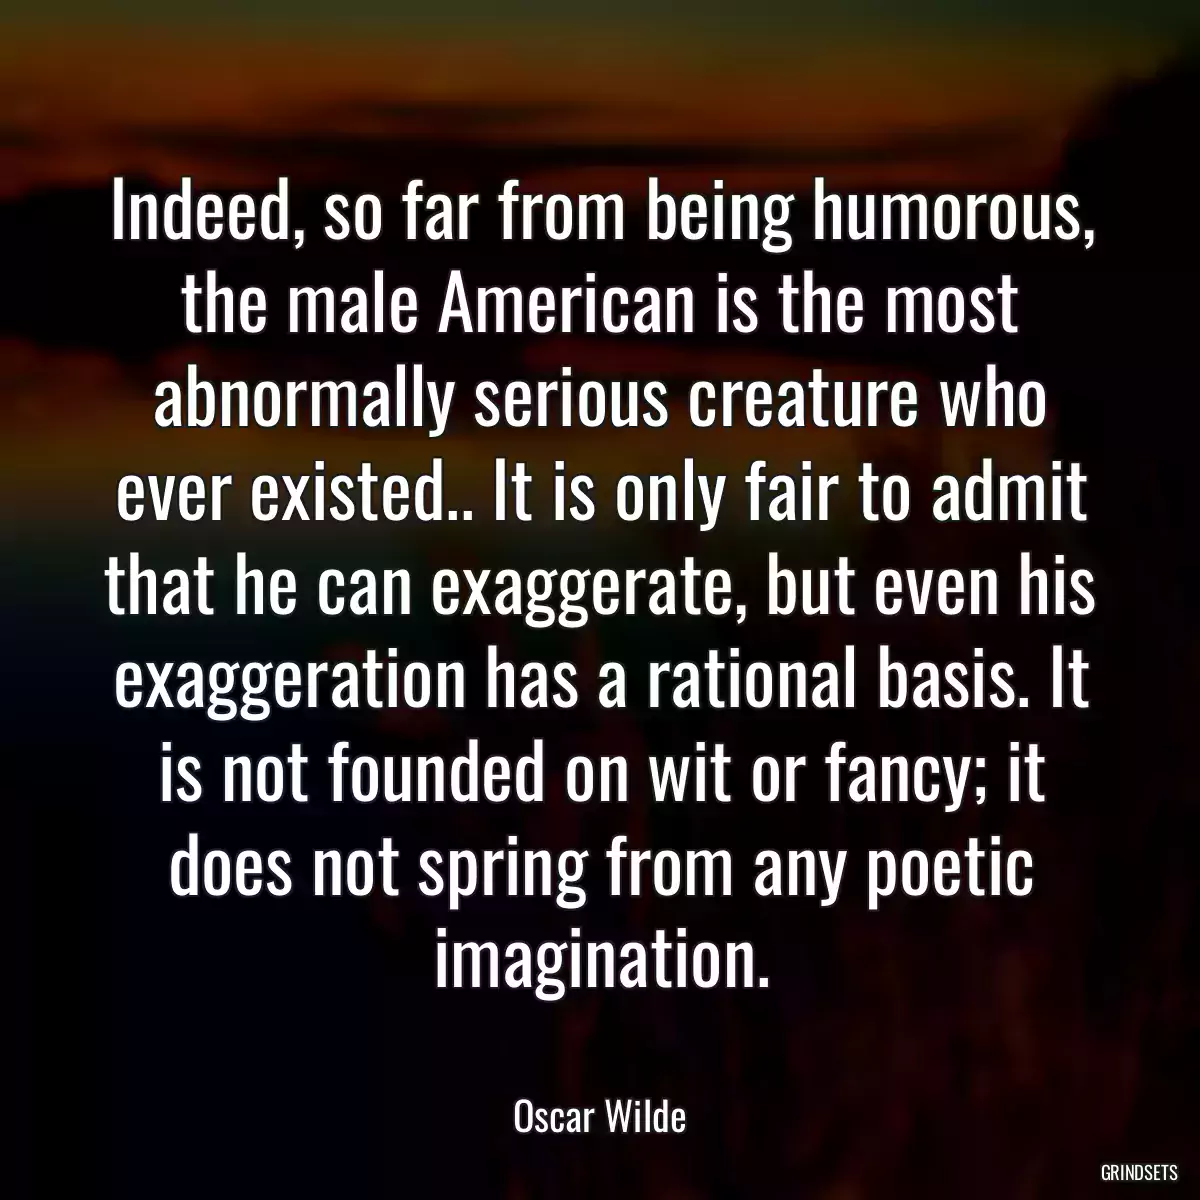 Indeed, so far from being humorous, the male American is the most abnormally serious creature who ever existed.. It is only fair to admit that he can exaggerate, but even his exaggeration has a rational basis. It is not founded on wit or fancy; it does not spring from any poetic imagination.